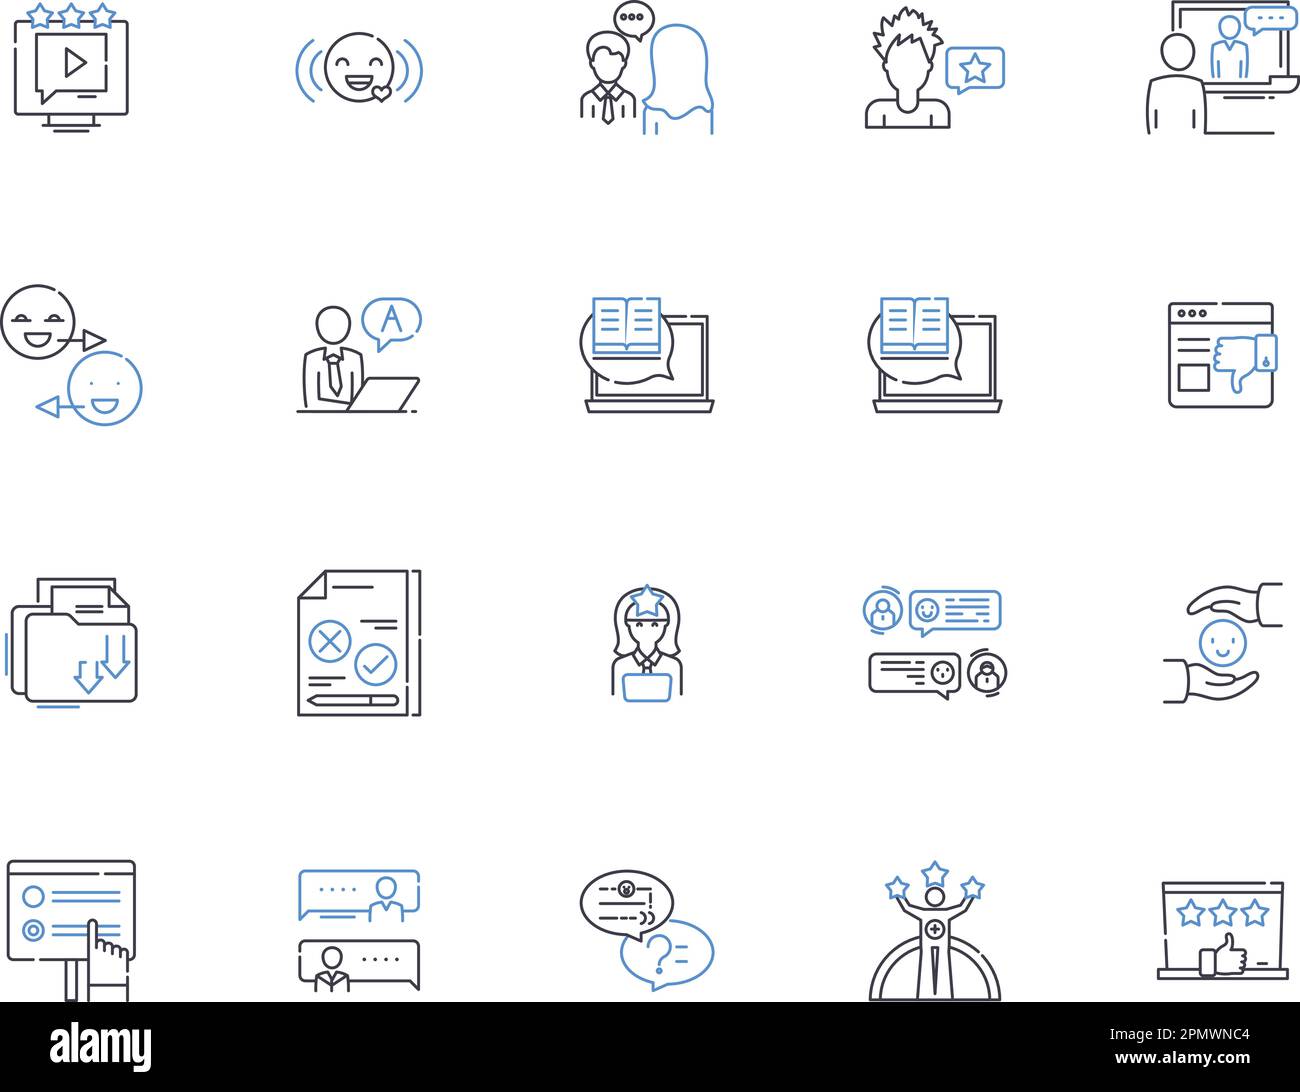 Reviews outline icons collection. Reviews, Ratings, Opinions, Feedback, Judgments, Assessments, Comments vector and illustration concept set Stock Vector